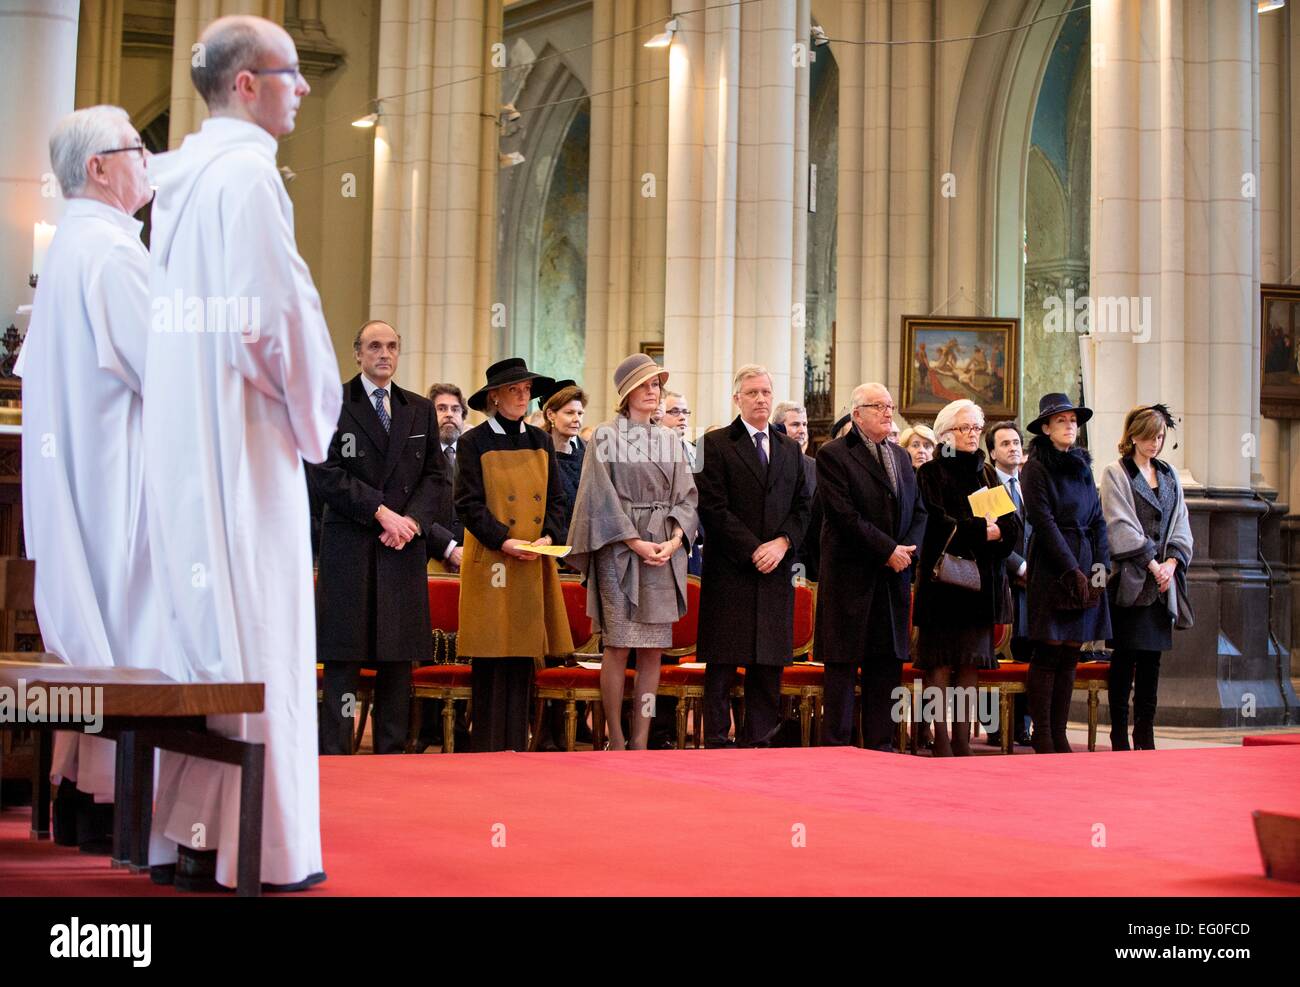 King Philippe, Queen Mathilde, King Albert, Queen Paola, Princess Astrid, Prince Lorenz, Princess Claire and Princess Esmeralda of Belgium at the mass to commemorate the deceased members of the Belgian Royal Family, at the cathedral in Laeken, Brussels, Belgium, 12 February. Photo: Patrick van Katwijk/ POINT DE VUE OUT - NO WIRE SERVICE - Stock Photo